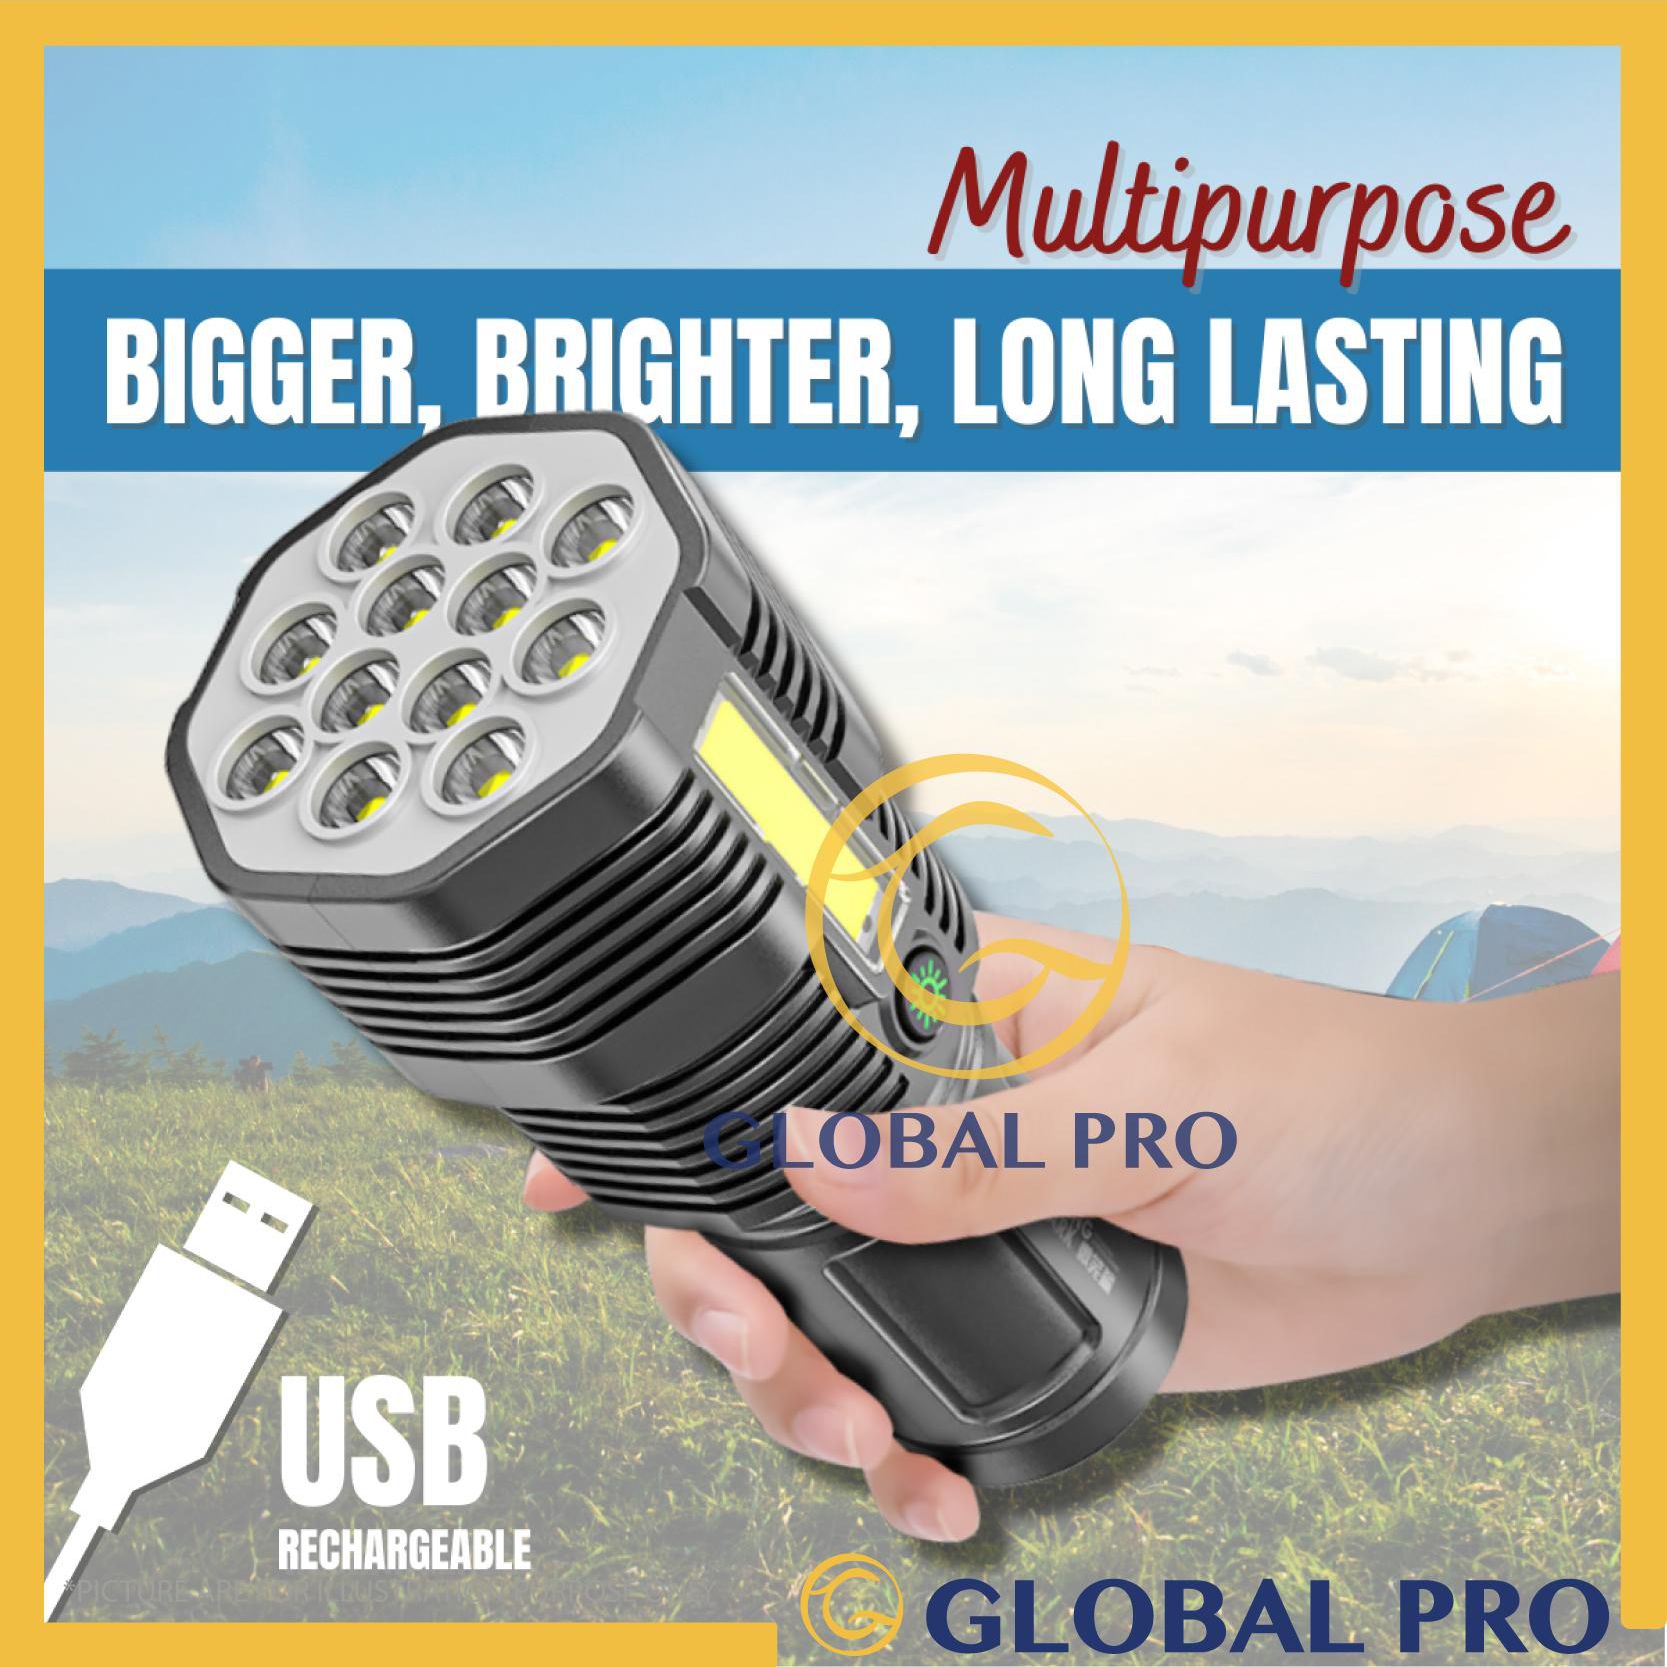 NEW High Power COB LED USB LED Torchlight Search Light Powerful Battery Tactical Flash